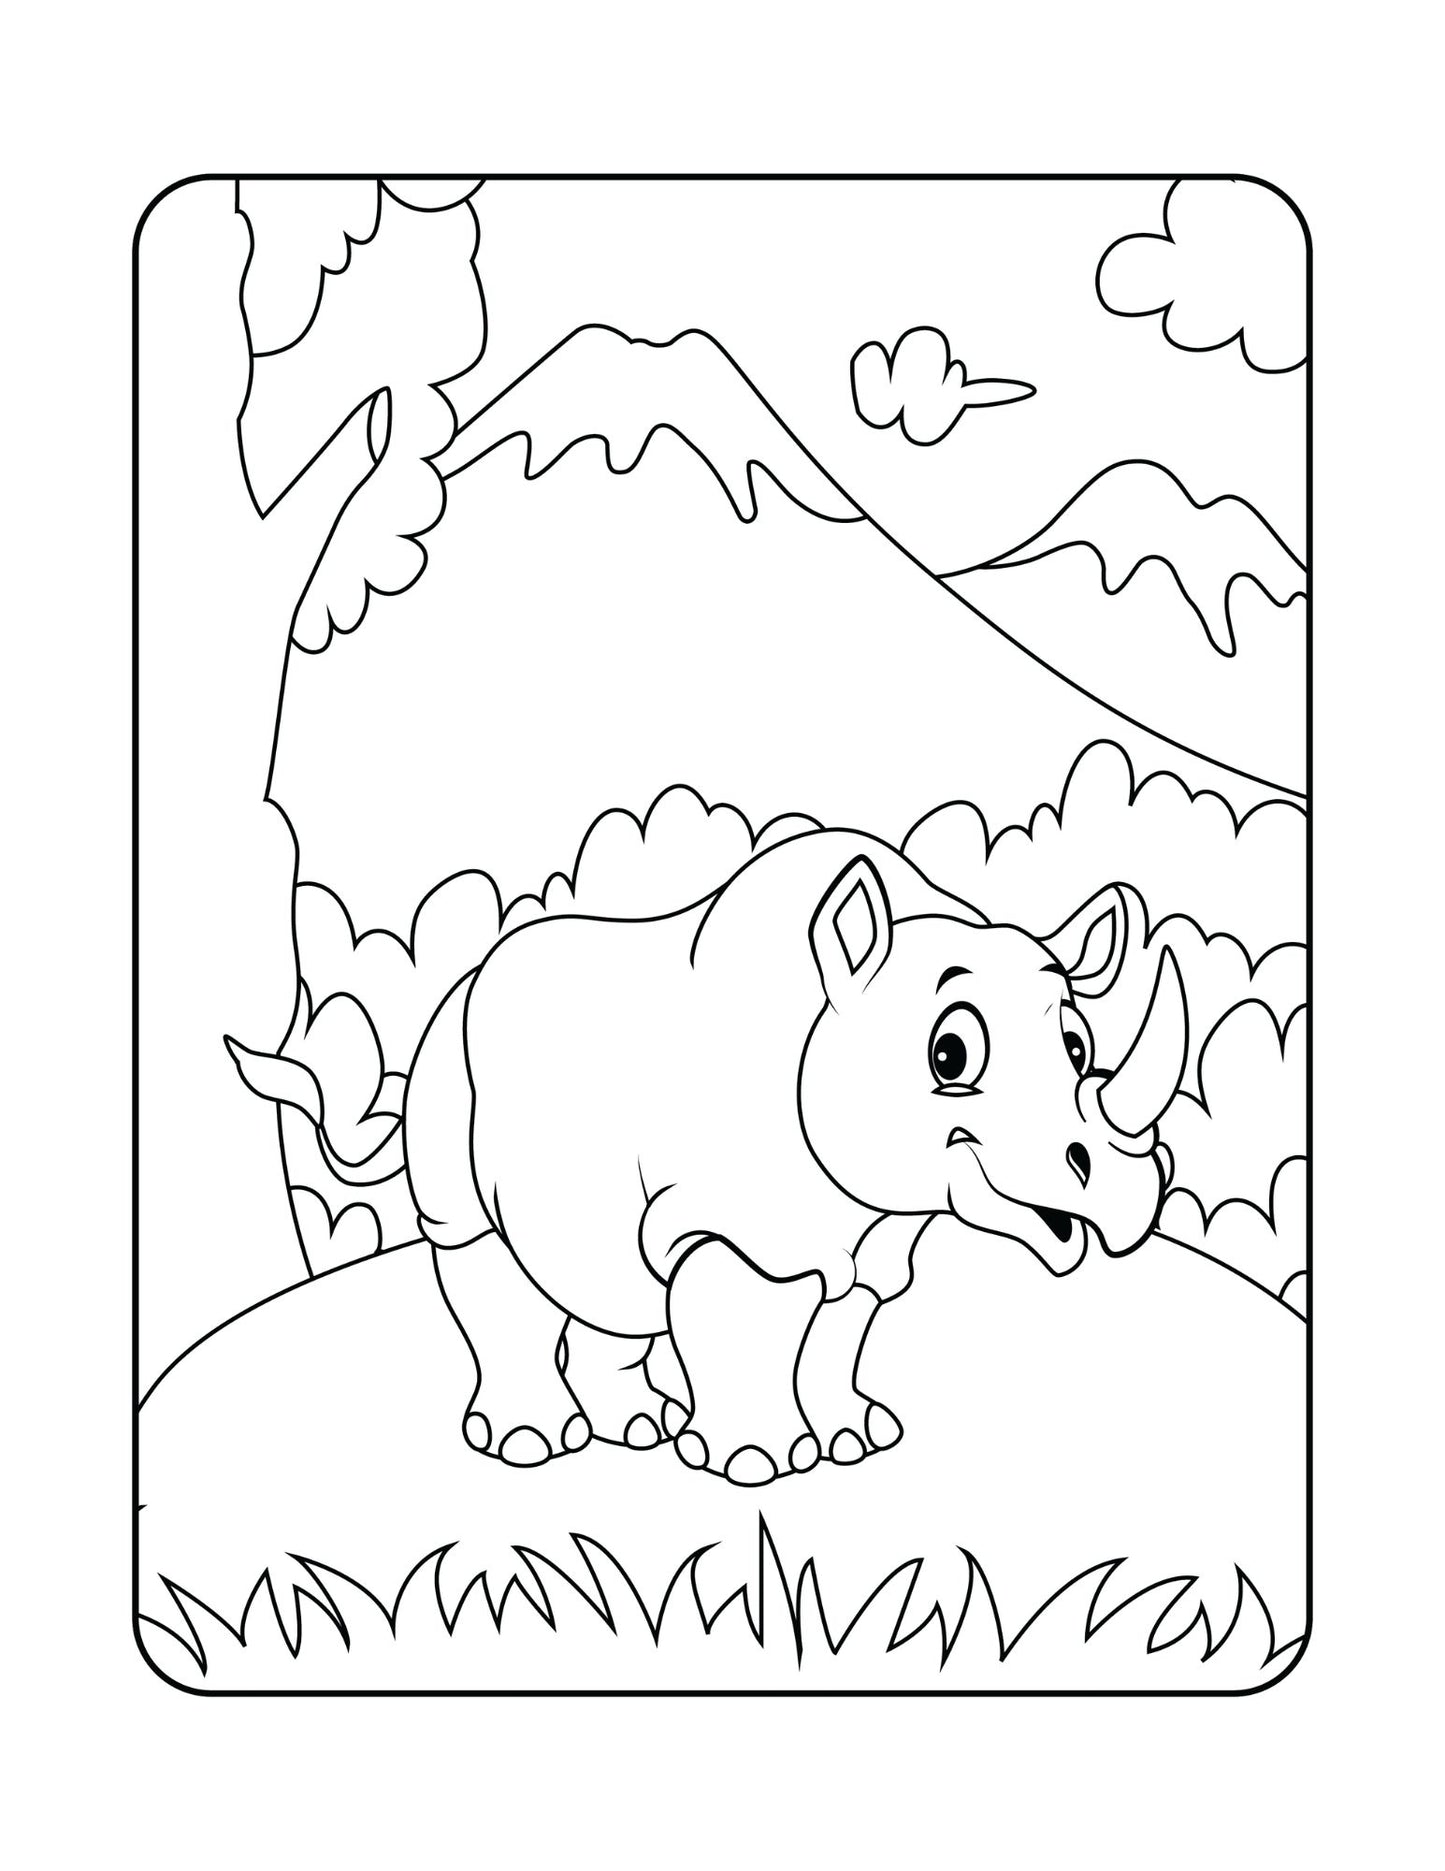 Happy Wild Animals Coloring Book For Kids Adults Zoo Animal Coloring Book 50 Jungle Animals Coloring Book Wild Animals Adult Coloring Book